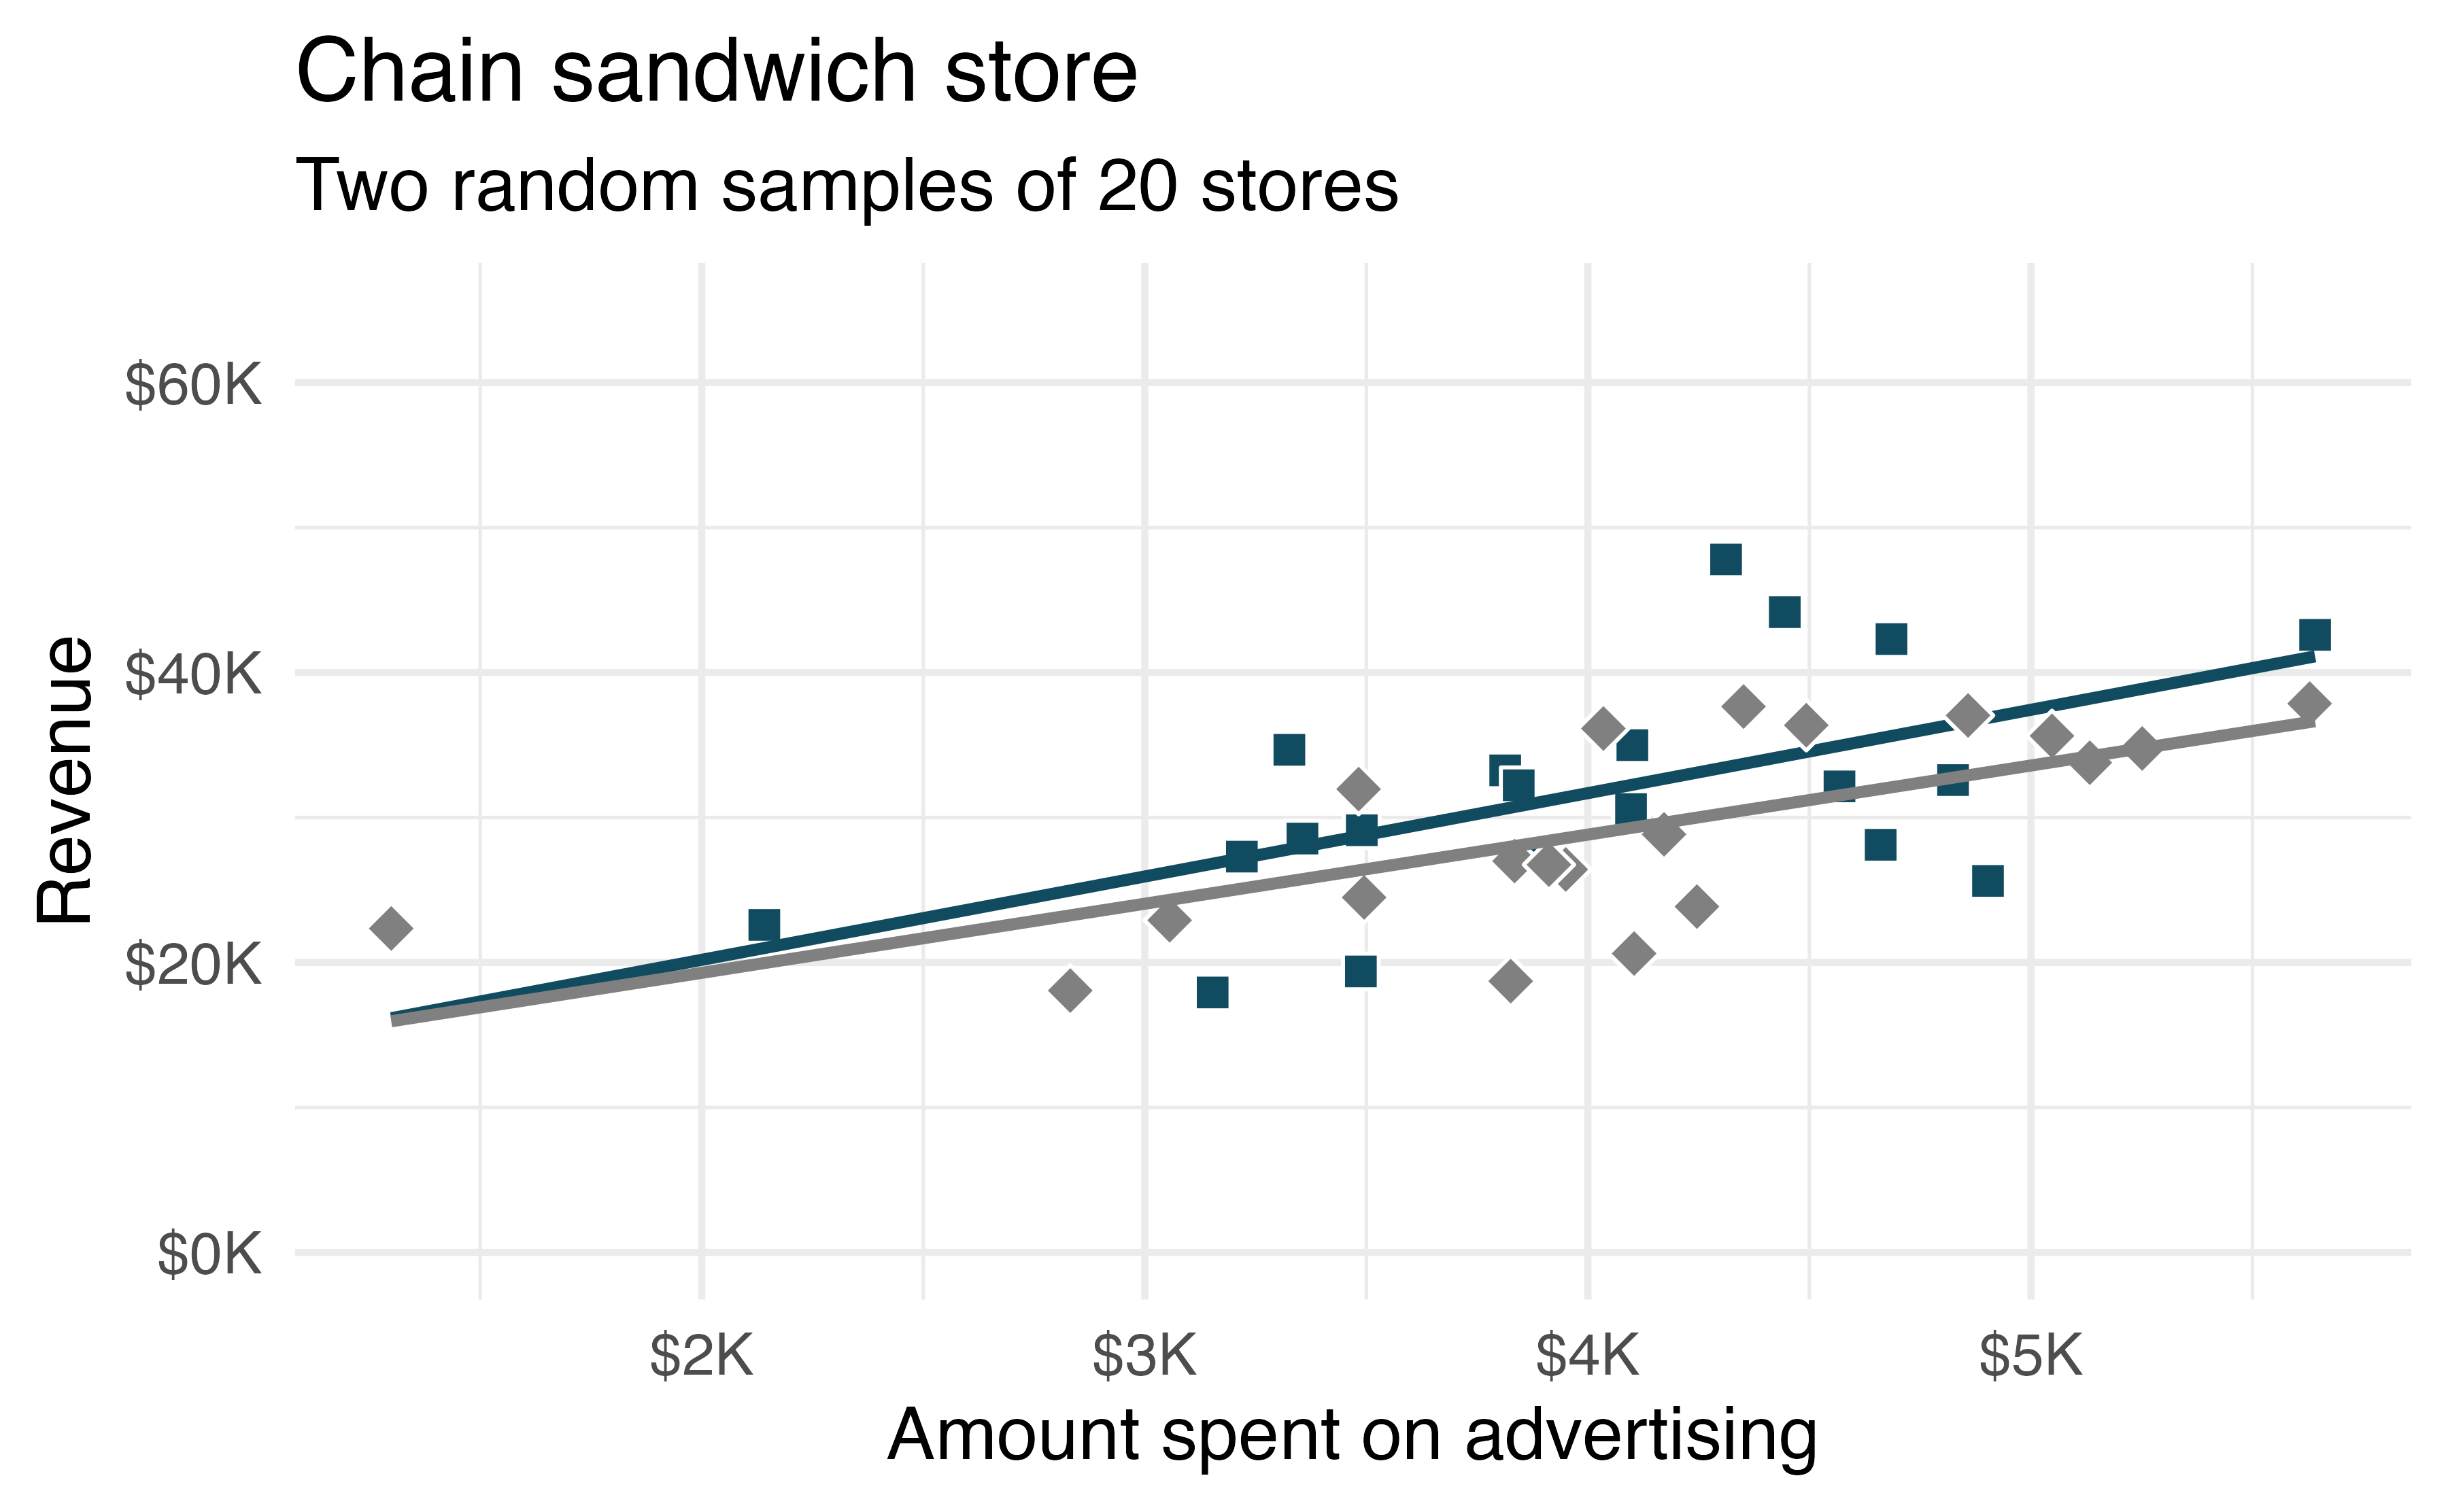 For two different random samples, superimposed onto the same plot, scatterplot with advertising amount on the x-axis and revenue on the y-axis. Two linear models are plotted to demonstrate that the lines are very similar, yet they are not the same.